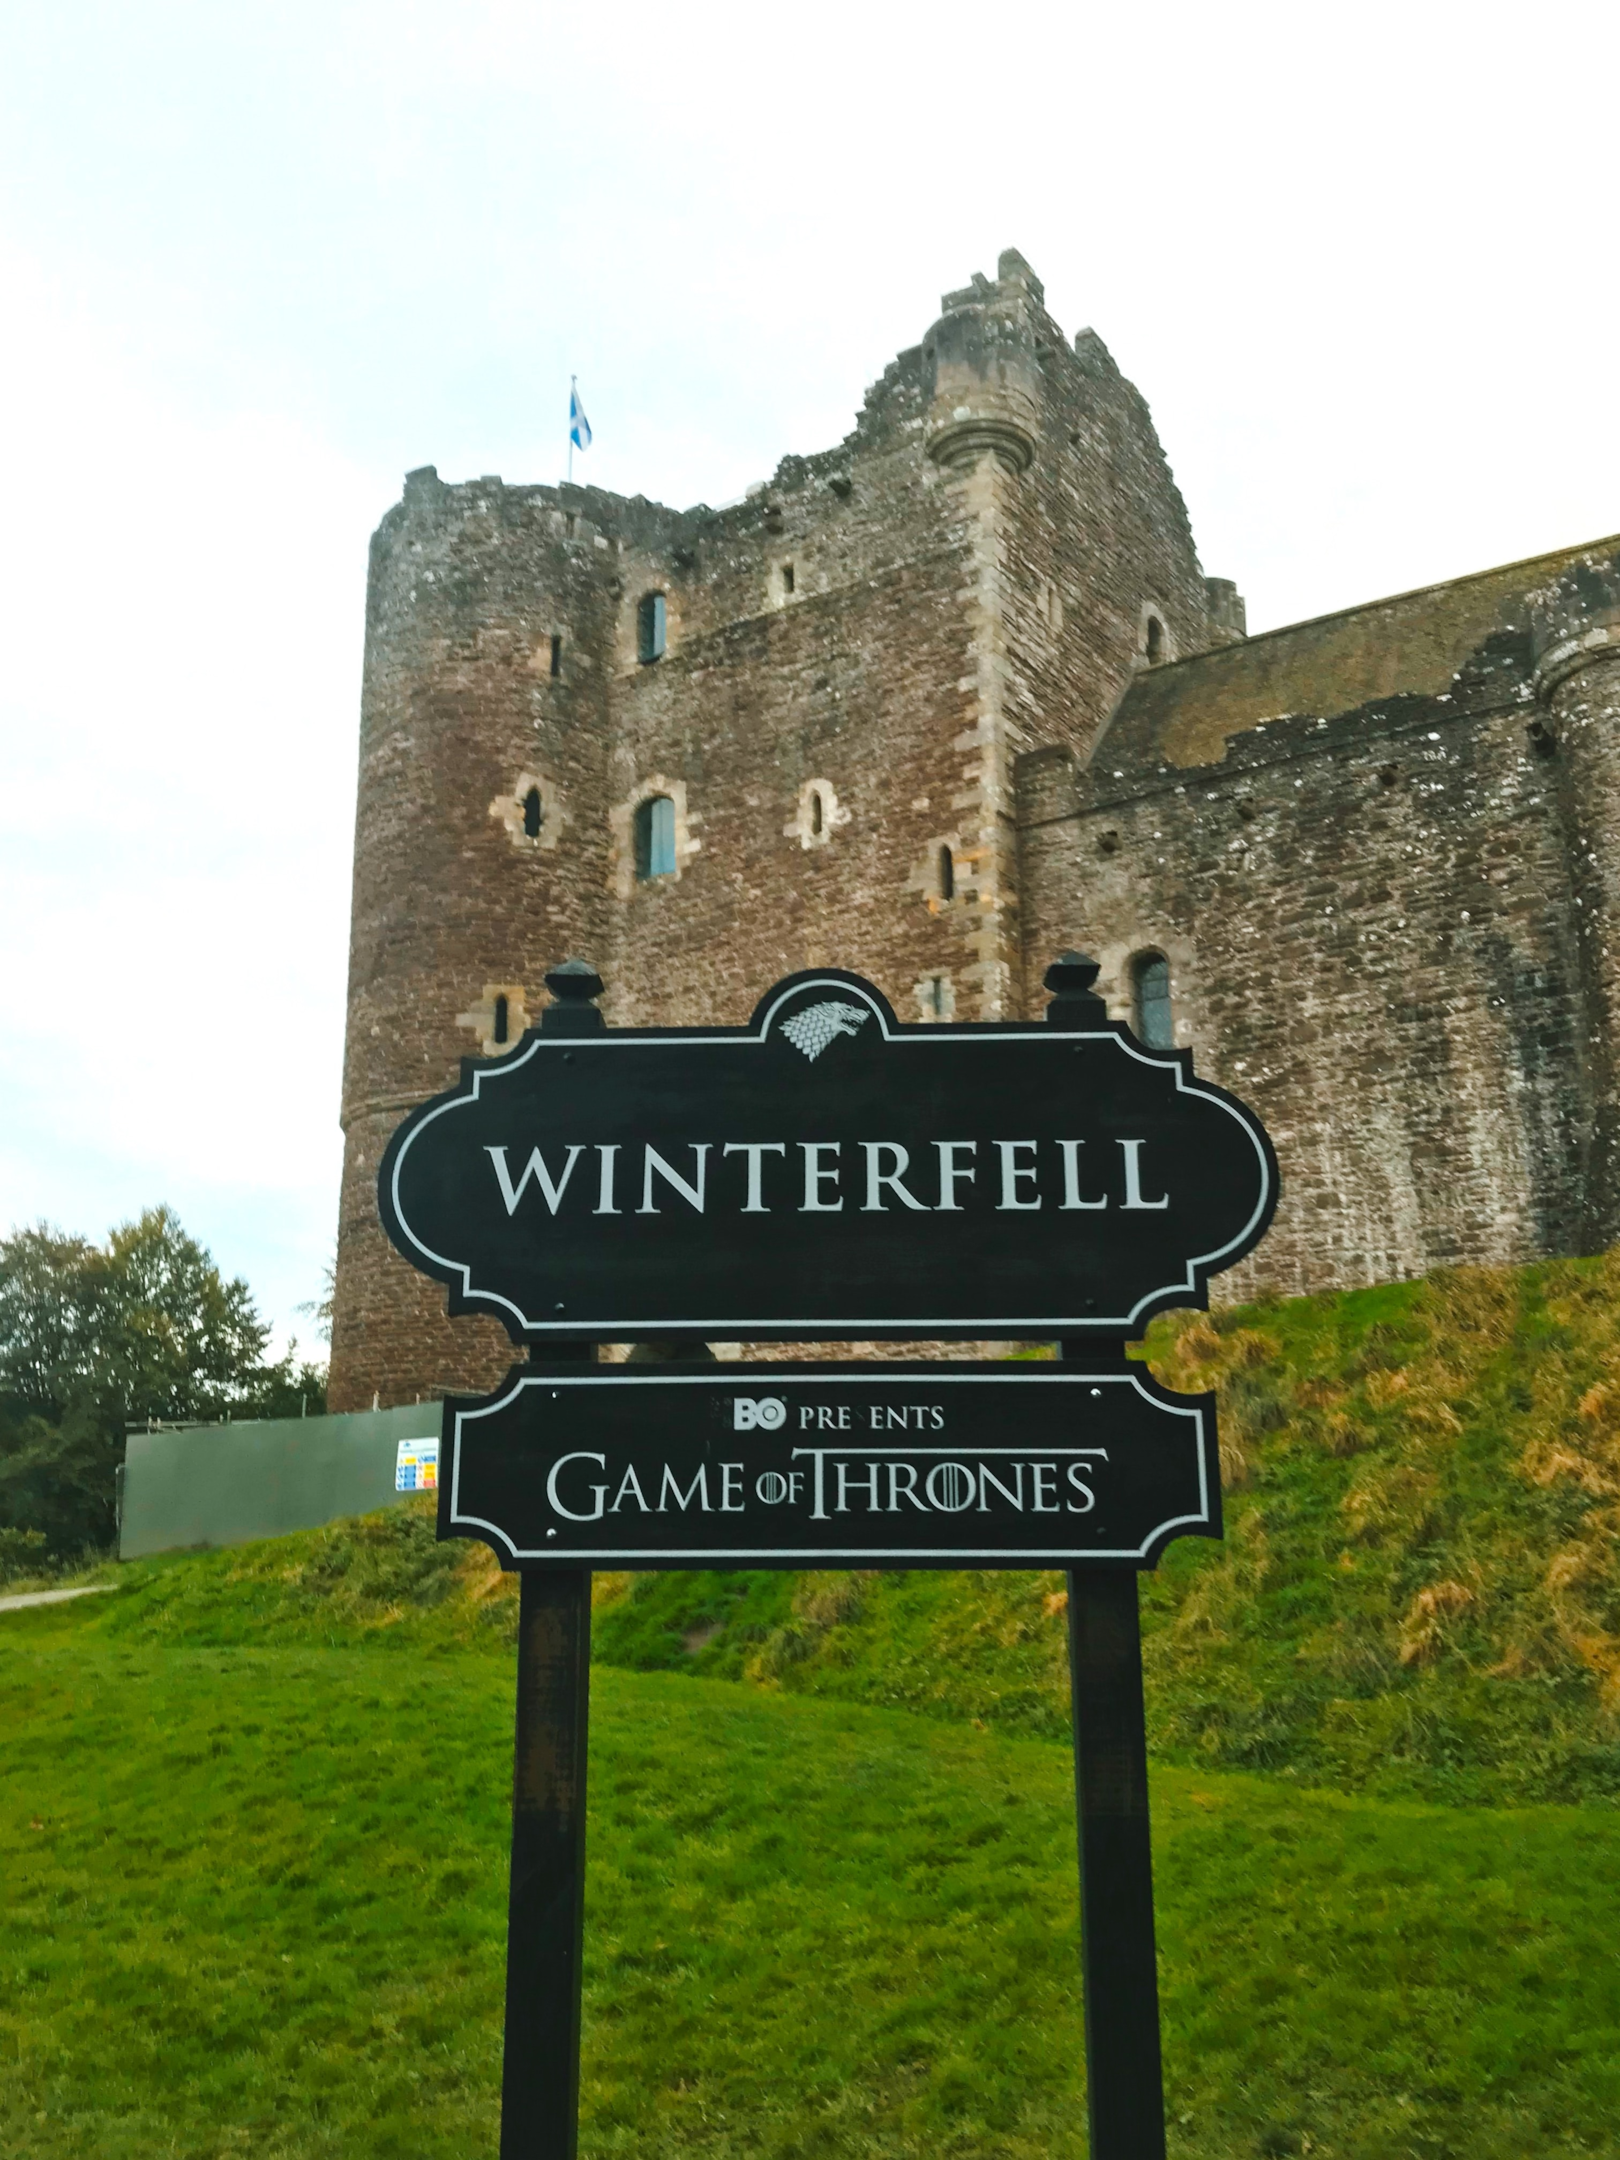 Game of Thrones Filming Location: Castle Ward